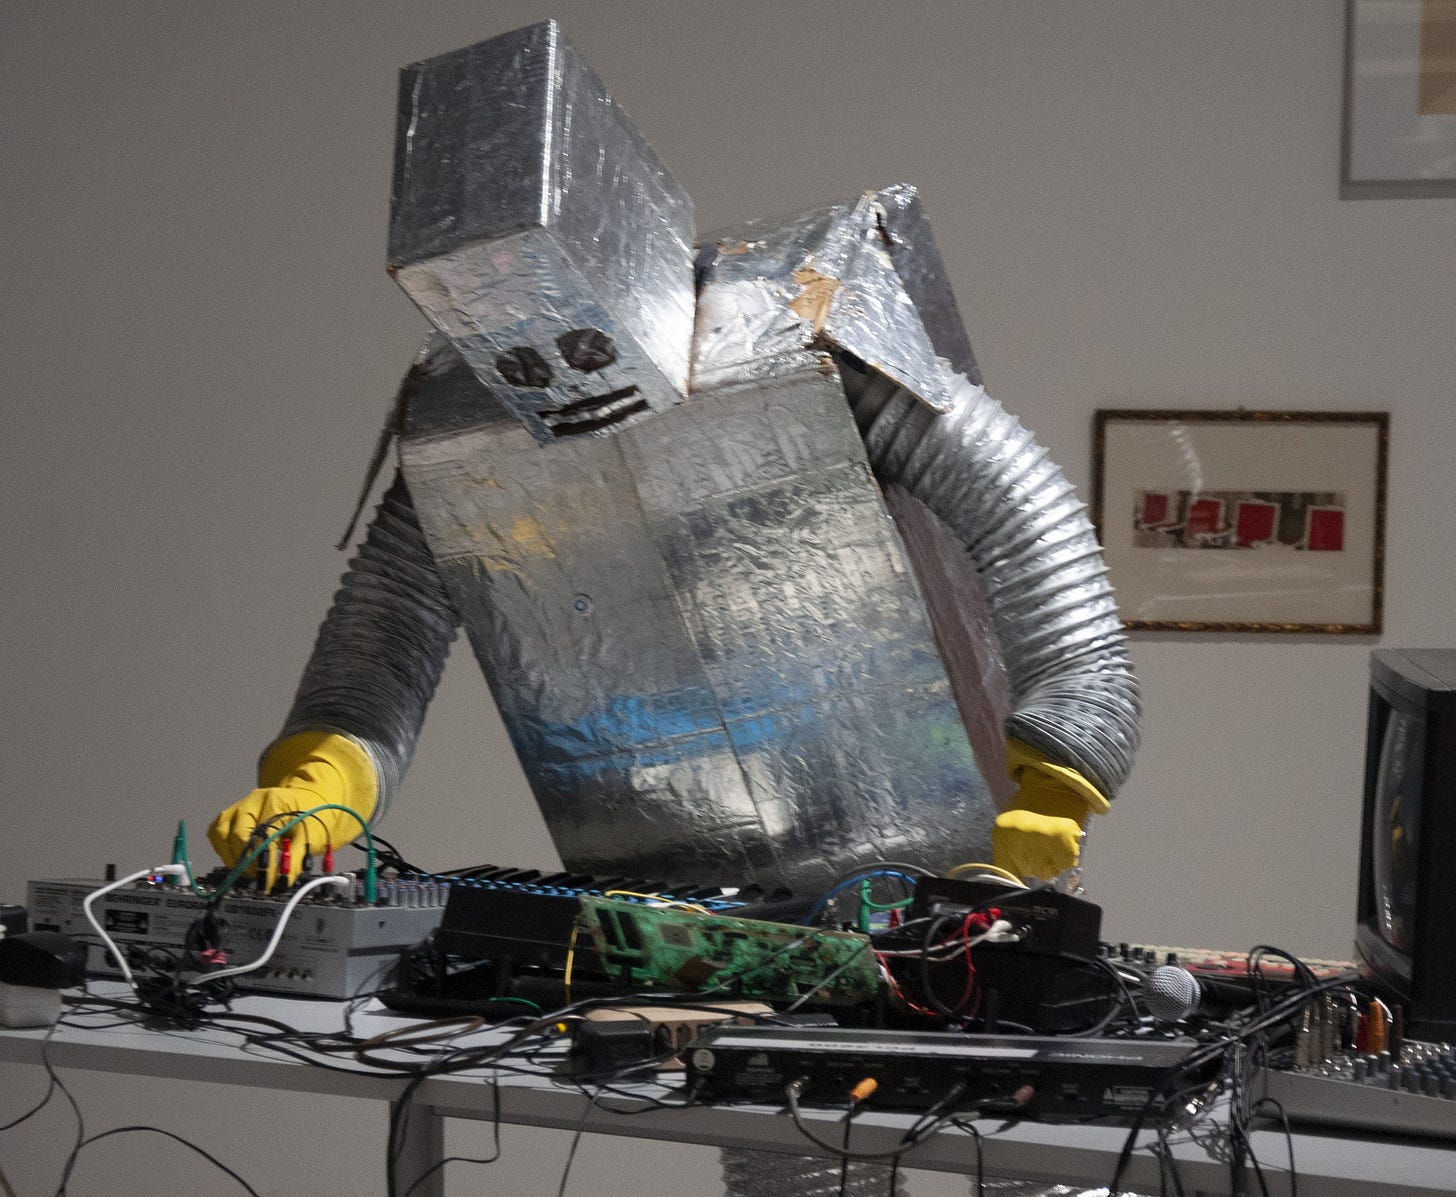 A person in a foil robot costume messing around on a switchboard.